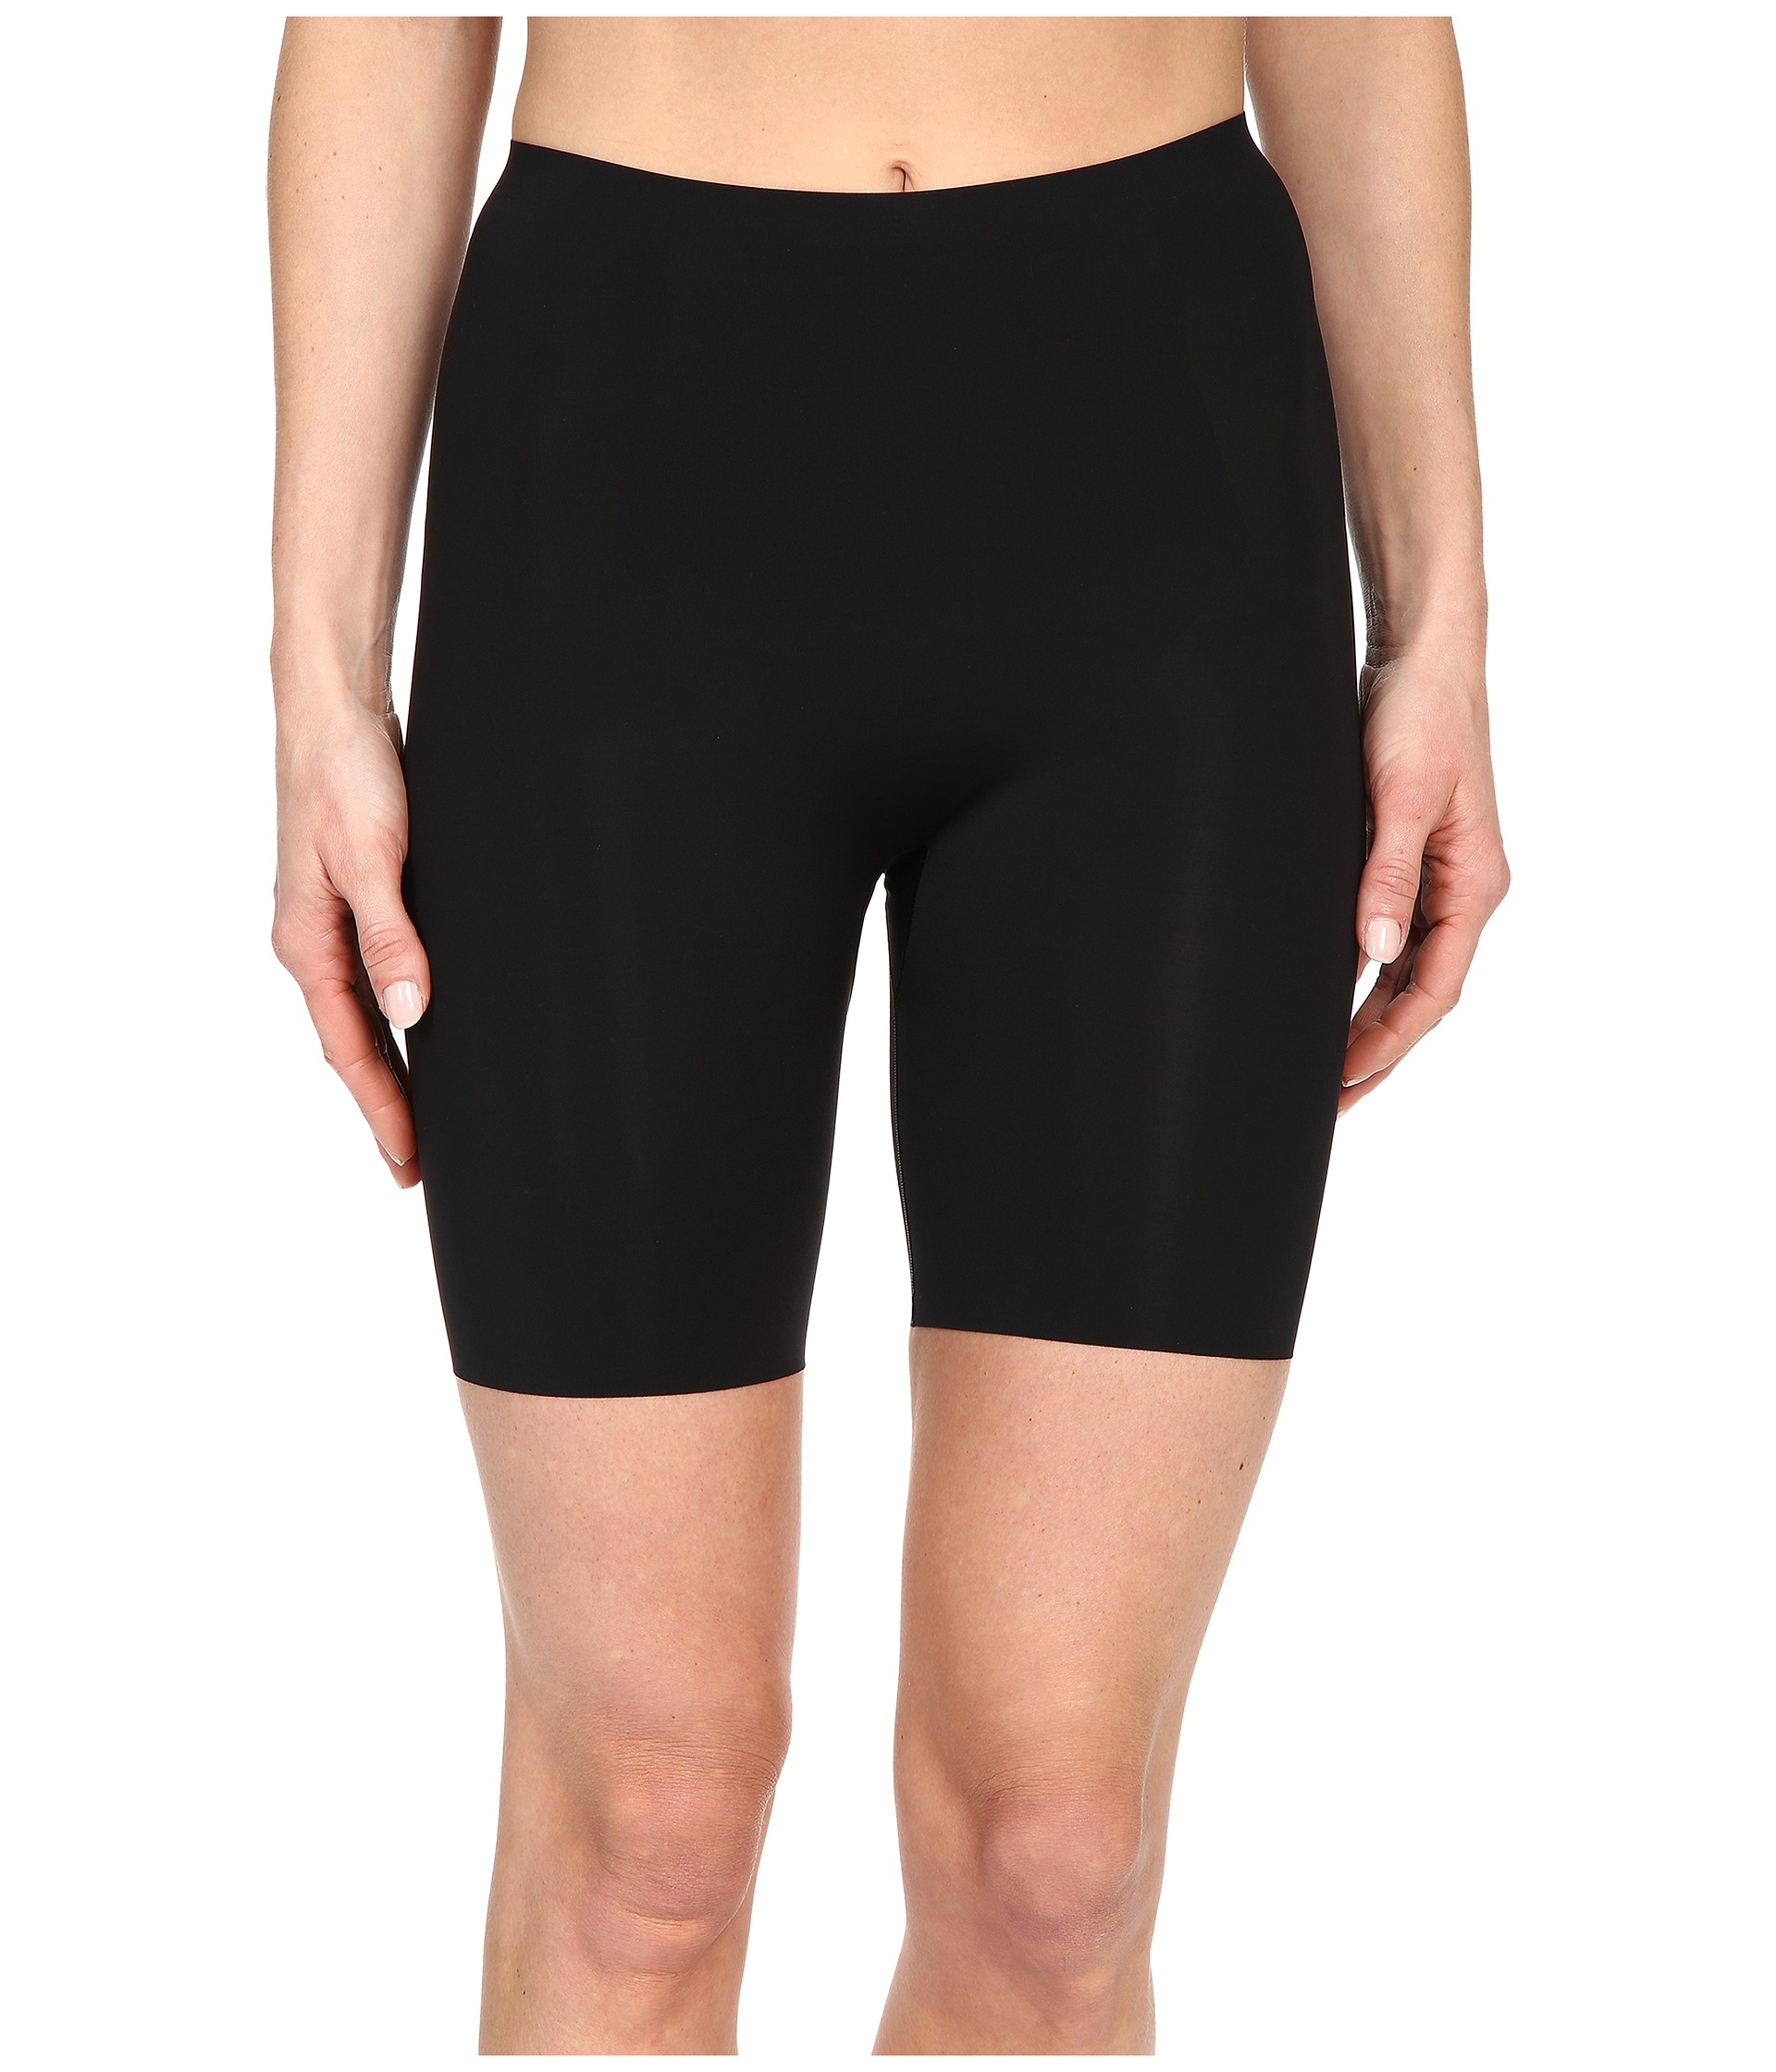 Spanx Thinstincts Mid-Thigh Short at Zappos.com